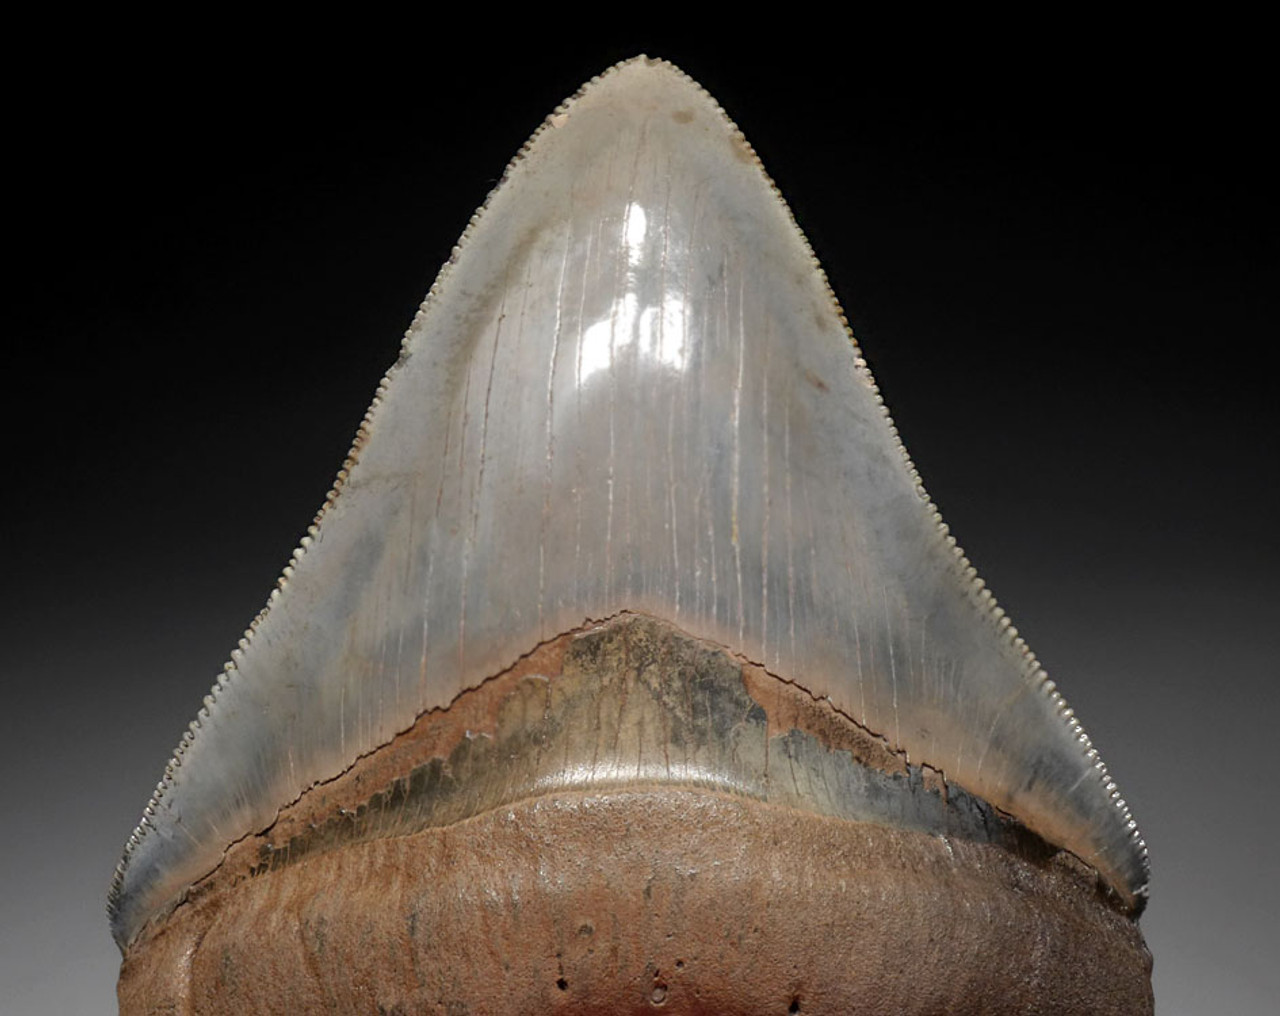 INVESTMENT GRADE 4.5 INCH MEGALODON SHARK TOOTH WITH BABY BLUE AND GOLD MOTTLING  *SH6-373